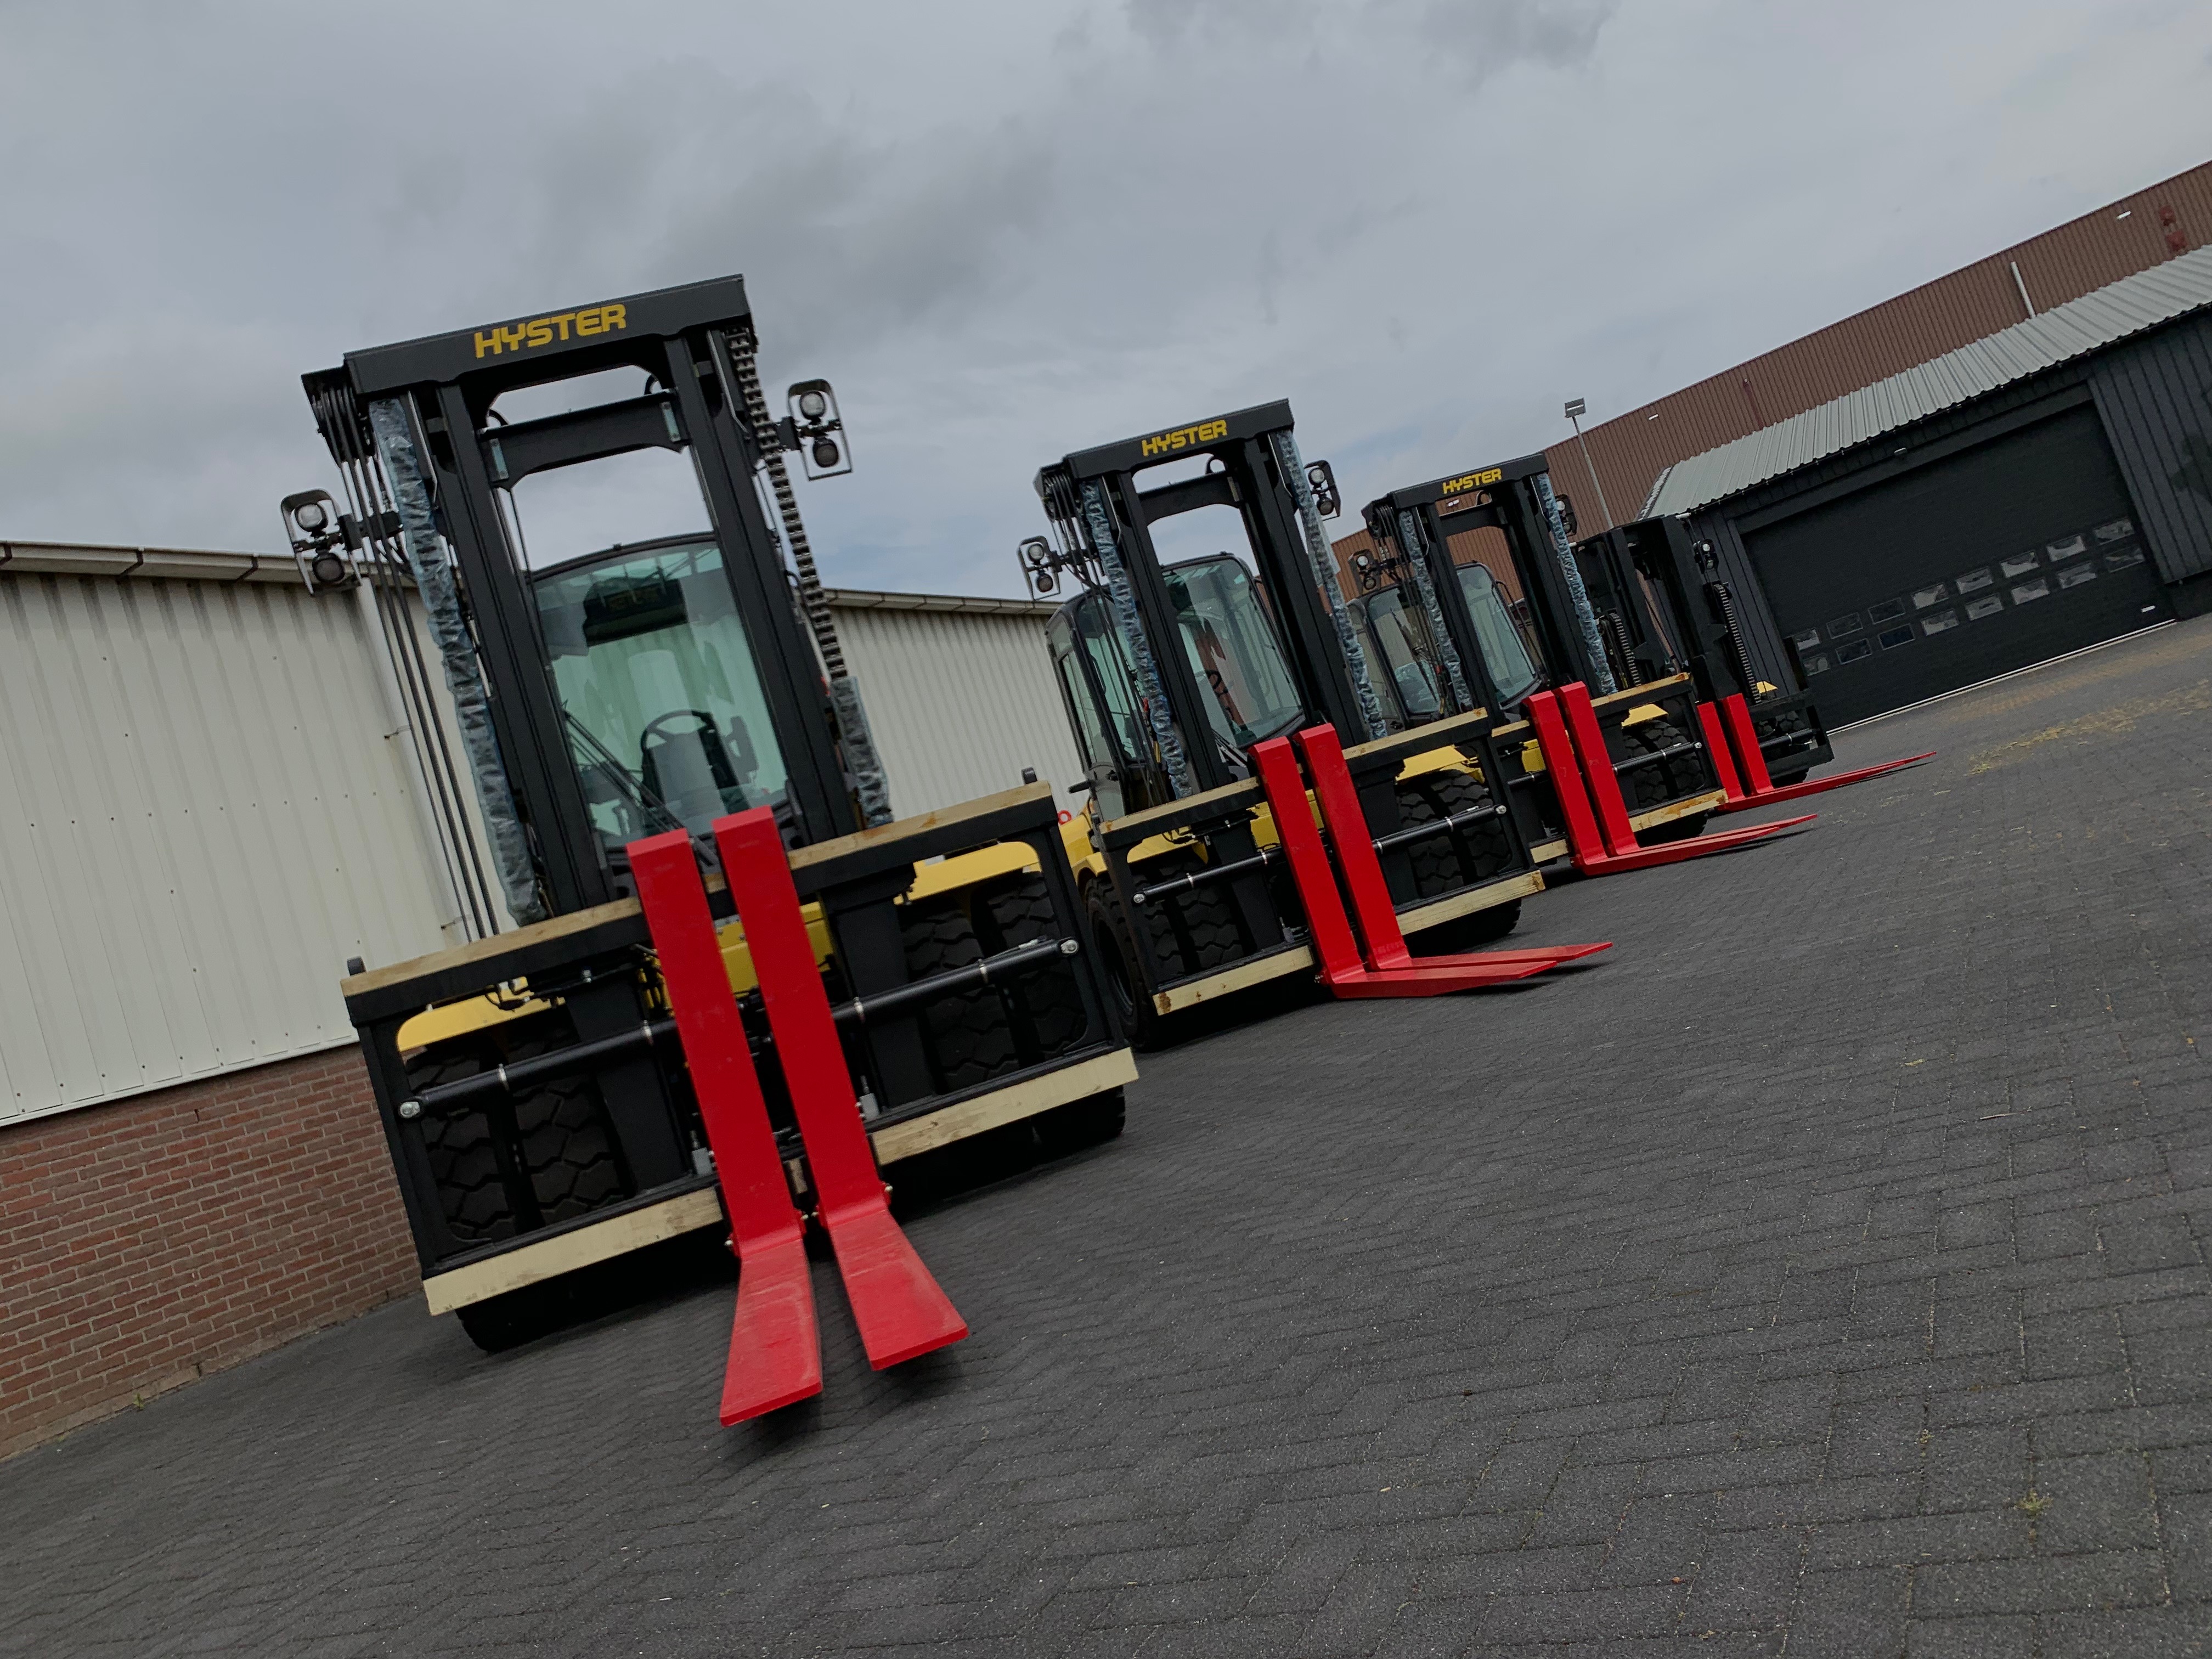 16 ton forklift for sale - Hyster H16XM-6 / H360HD2